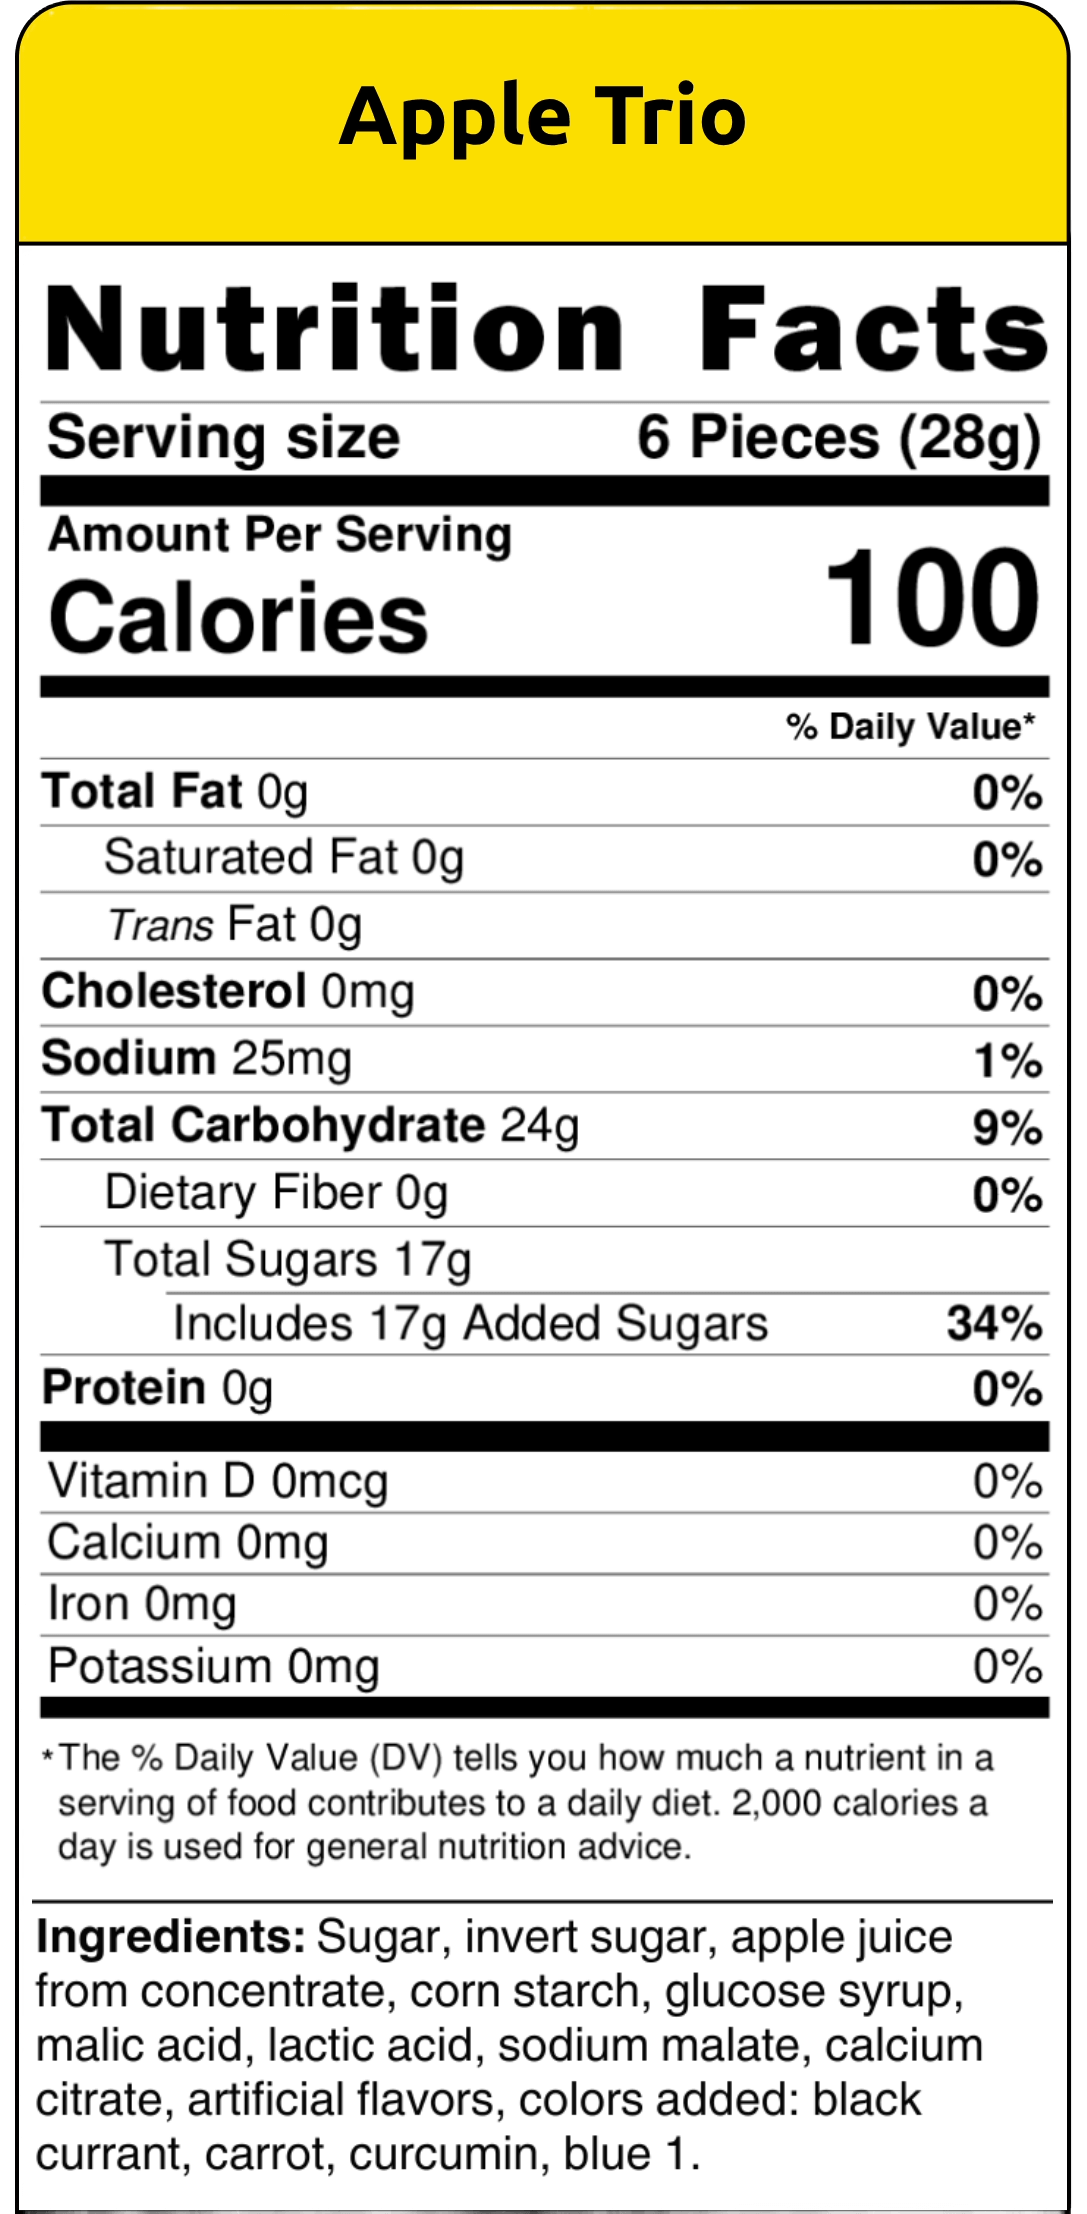 nutritional facts bunch of bananas